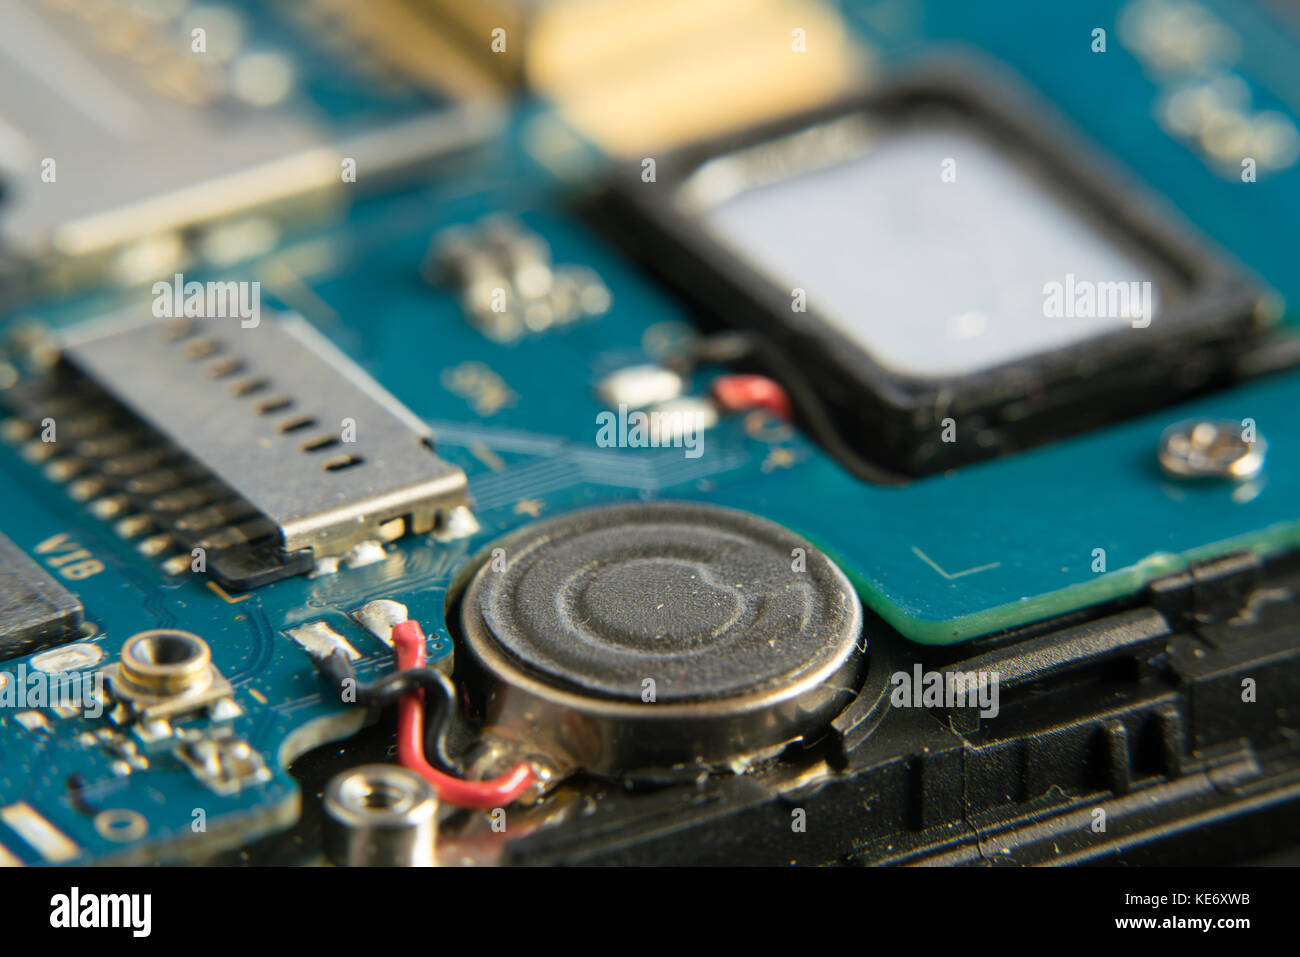 Mobile Phone Repair High Resolution Stock Photography and Images - Alamy